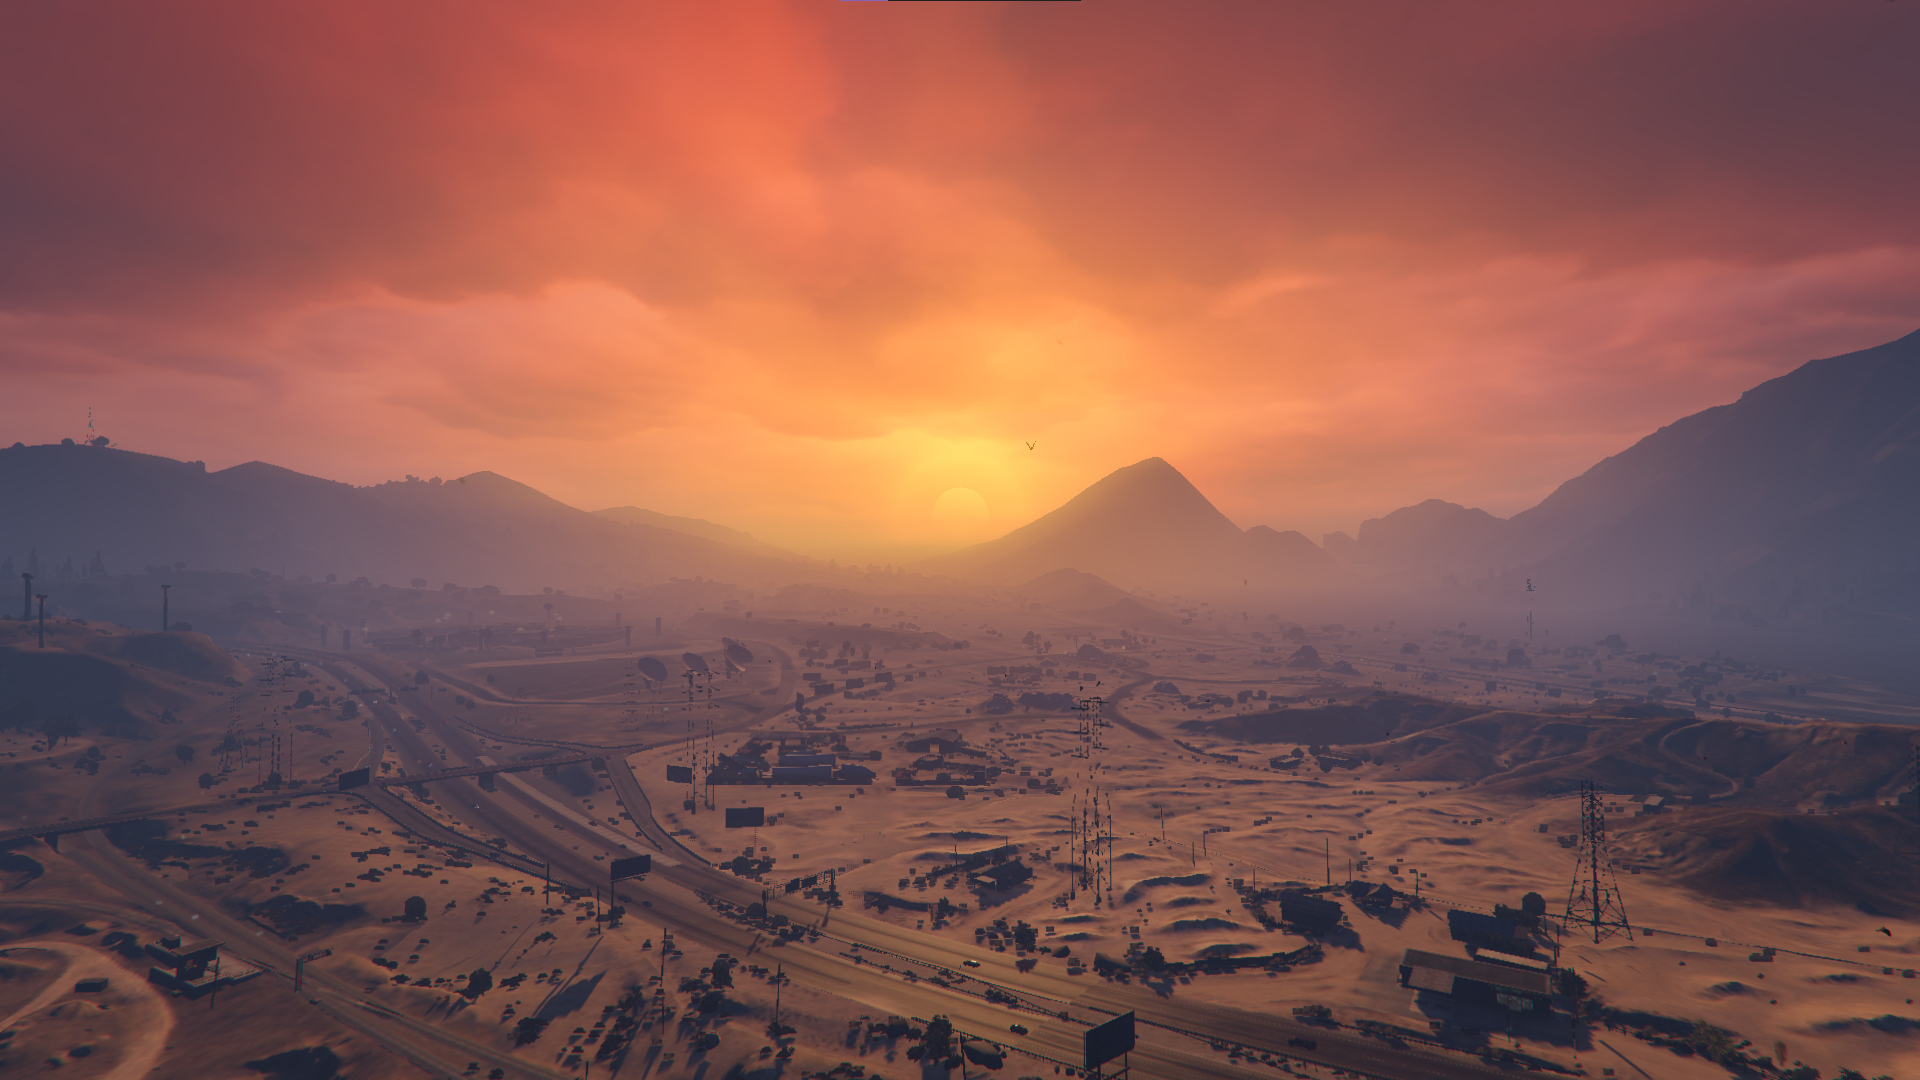 4K Grand Theft Auto V Scenery Image Wallpapers